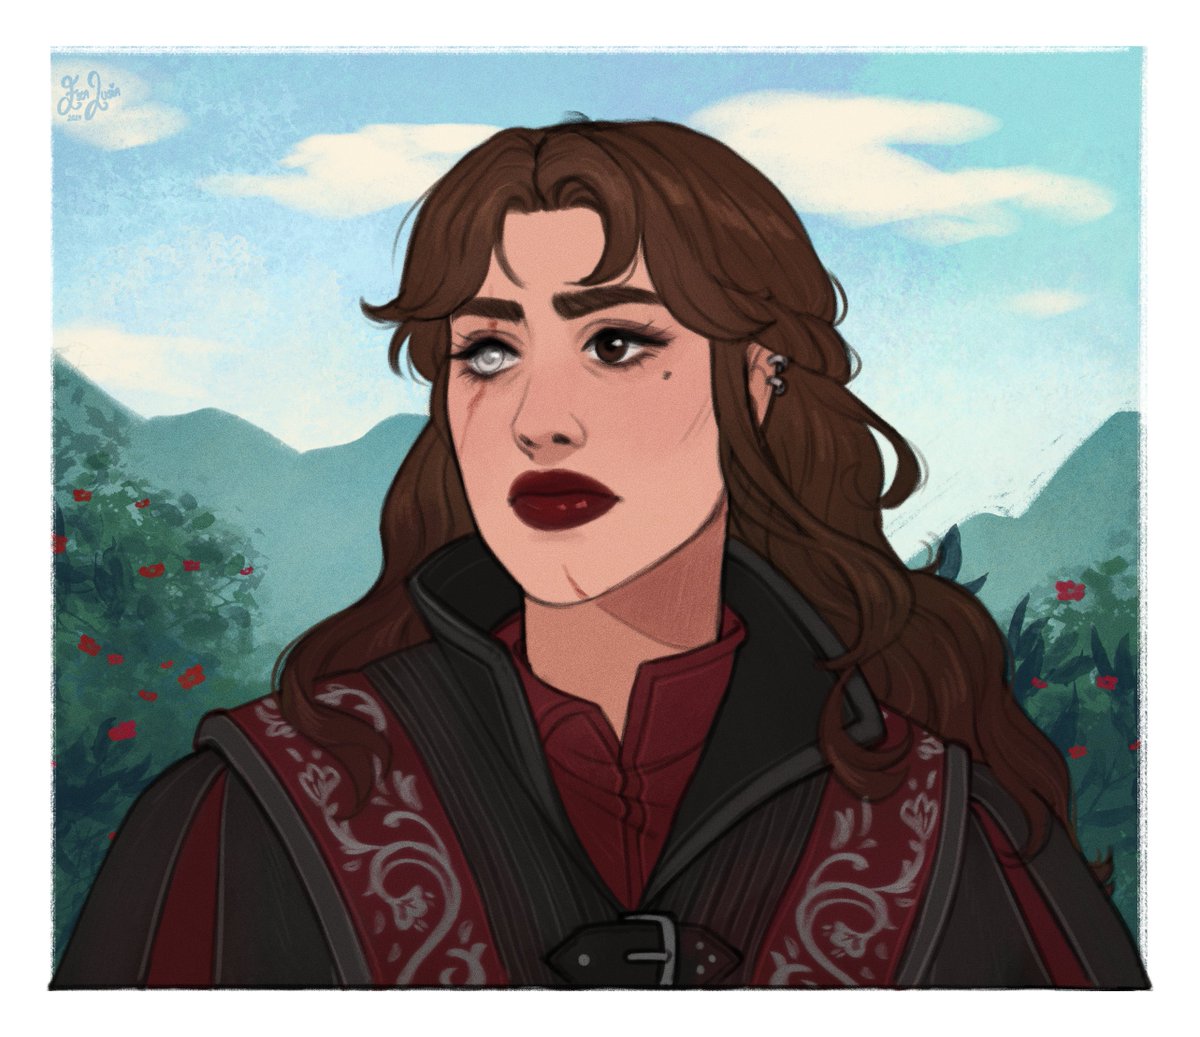 Com of the most beautiful BG3 character I ever did see 🥹🌹 - Thank you for supporting me!!